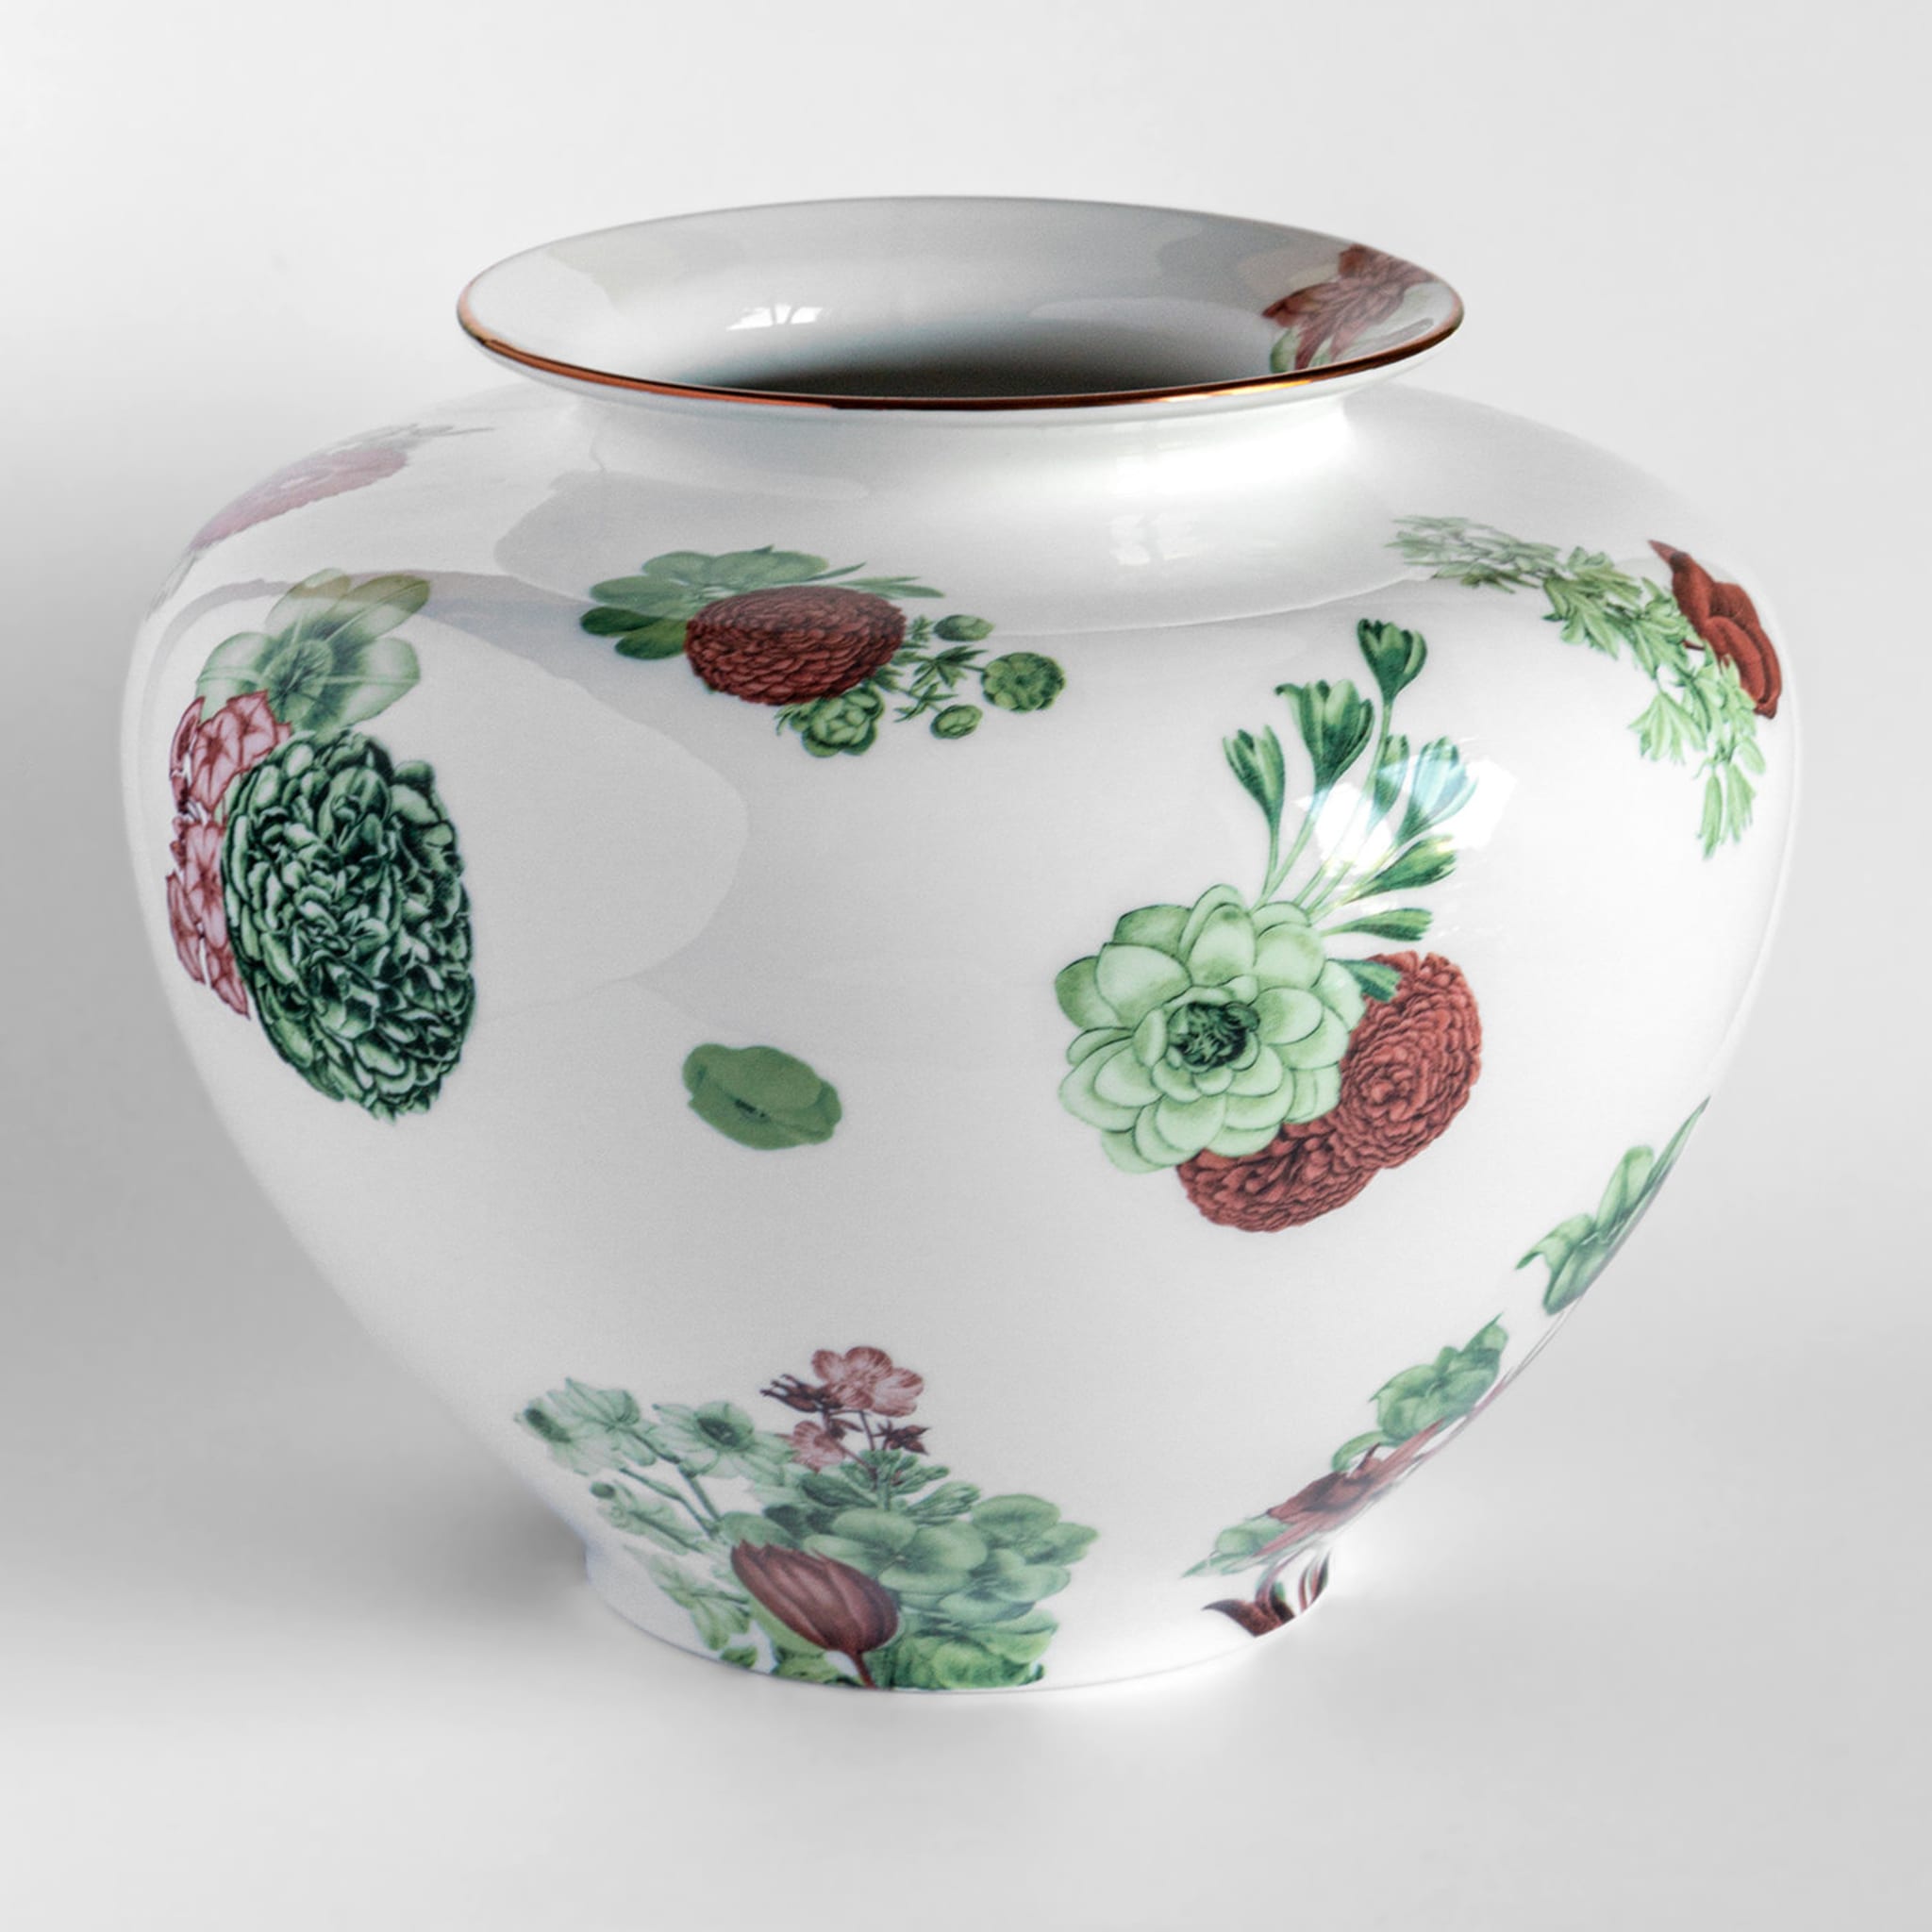 Amphora Porcelain Vase With Green And Red Flowers H24Cm - Alternative view 1